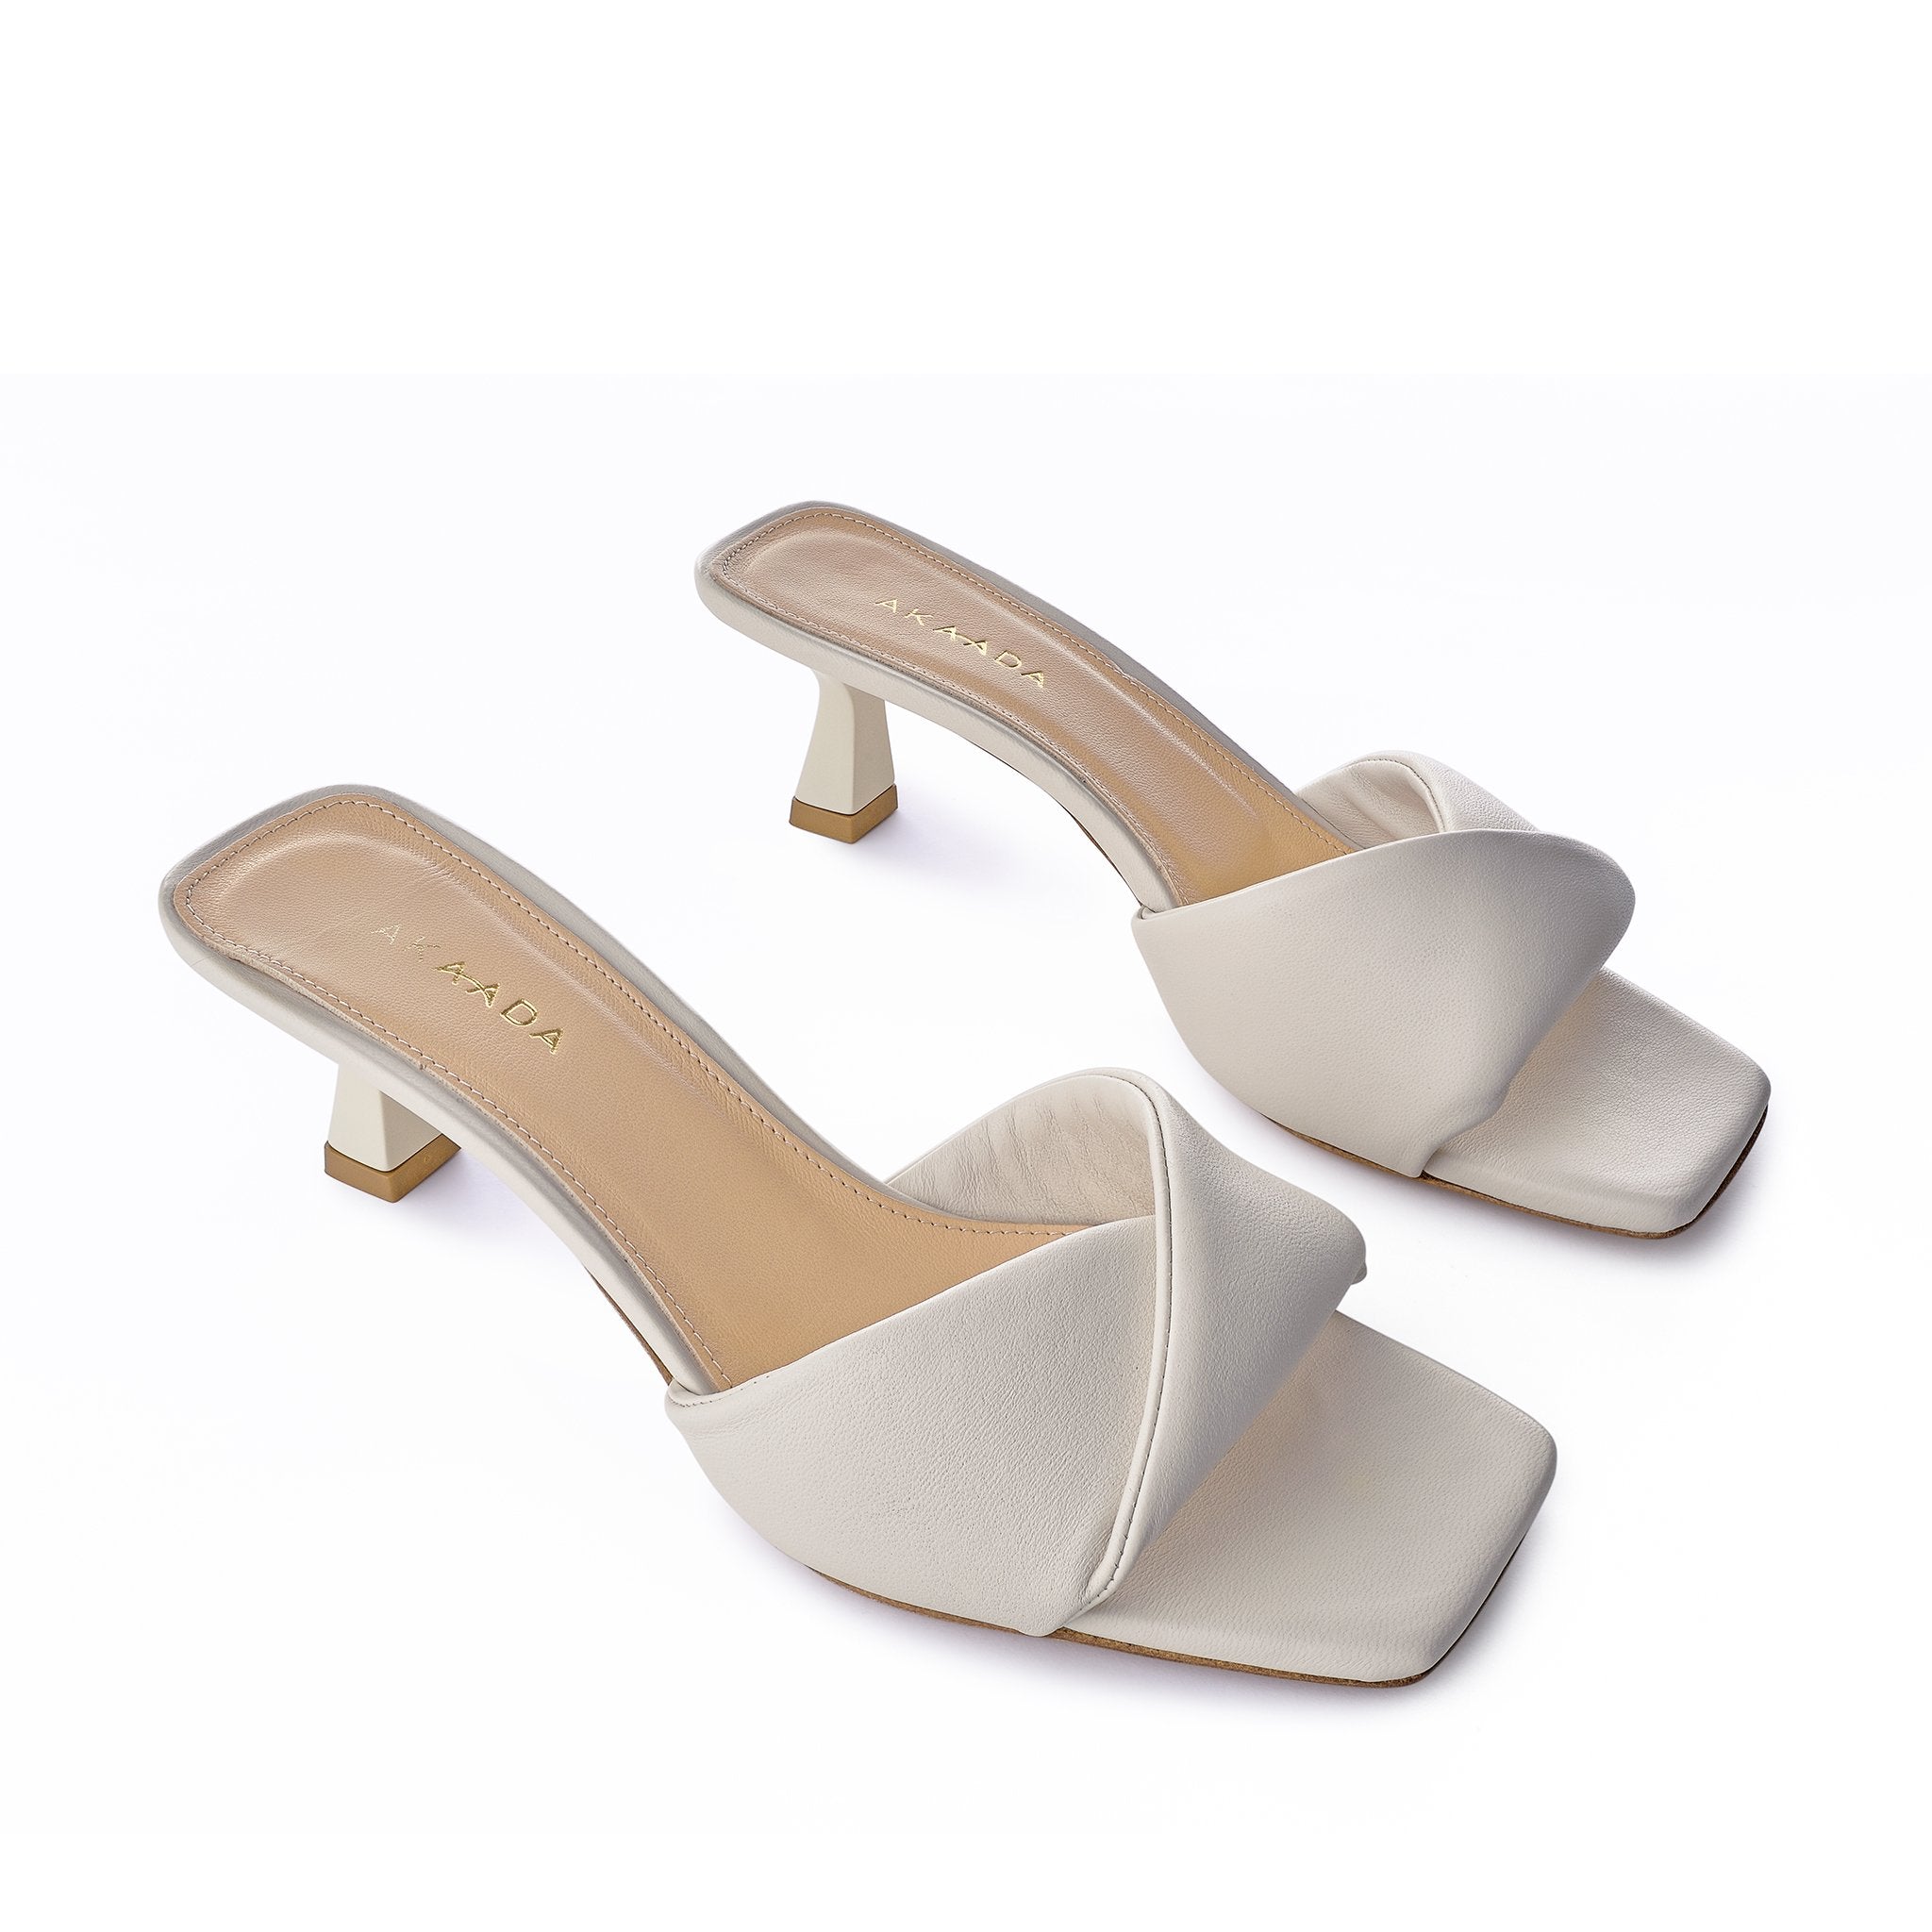 Haya Off White Soft Leather Sandals 1413-01 - 5